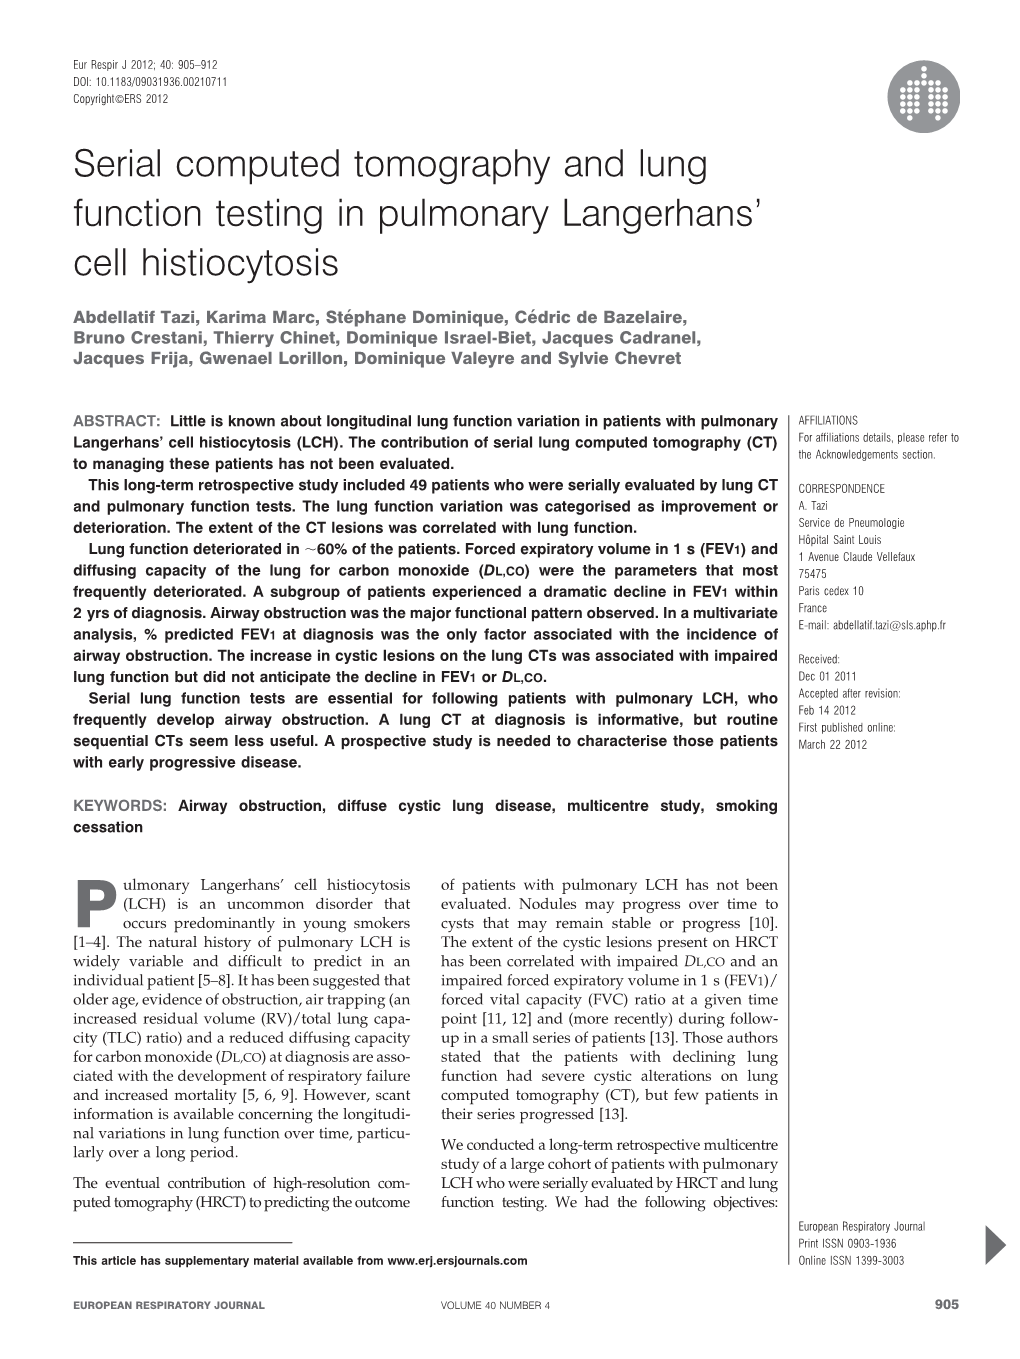 Serial Computed Tomography and Lung Function Testing in Pulmonary Langerhans’ Cell Histiocytosis